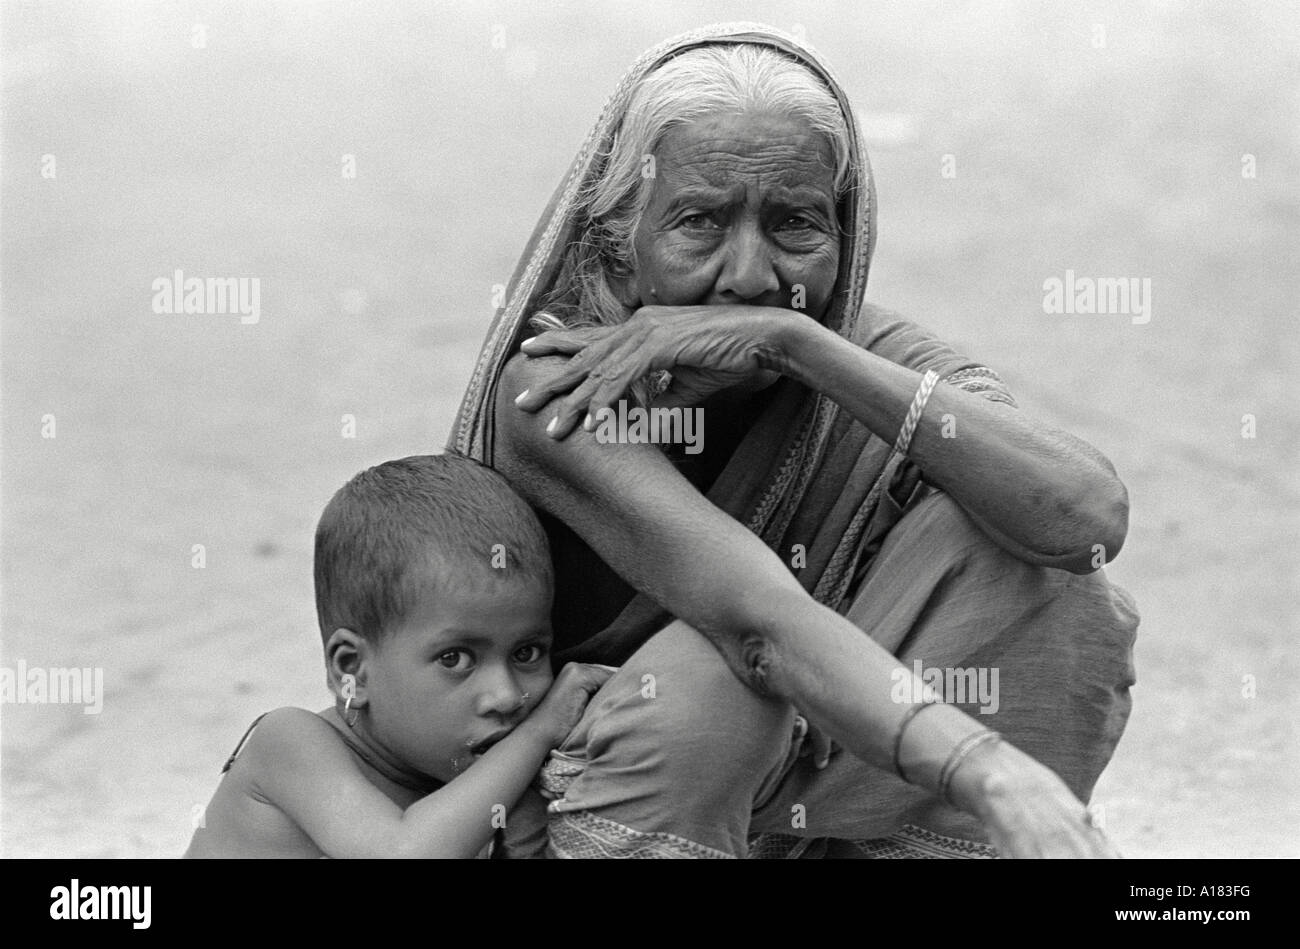 B/W portrait of an elderly woman with her grandson from a farming village near Tangail, Bangladesh Stock Photo